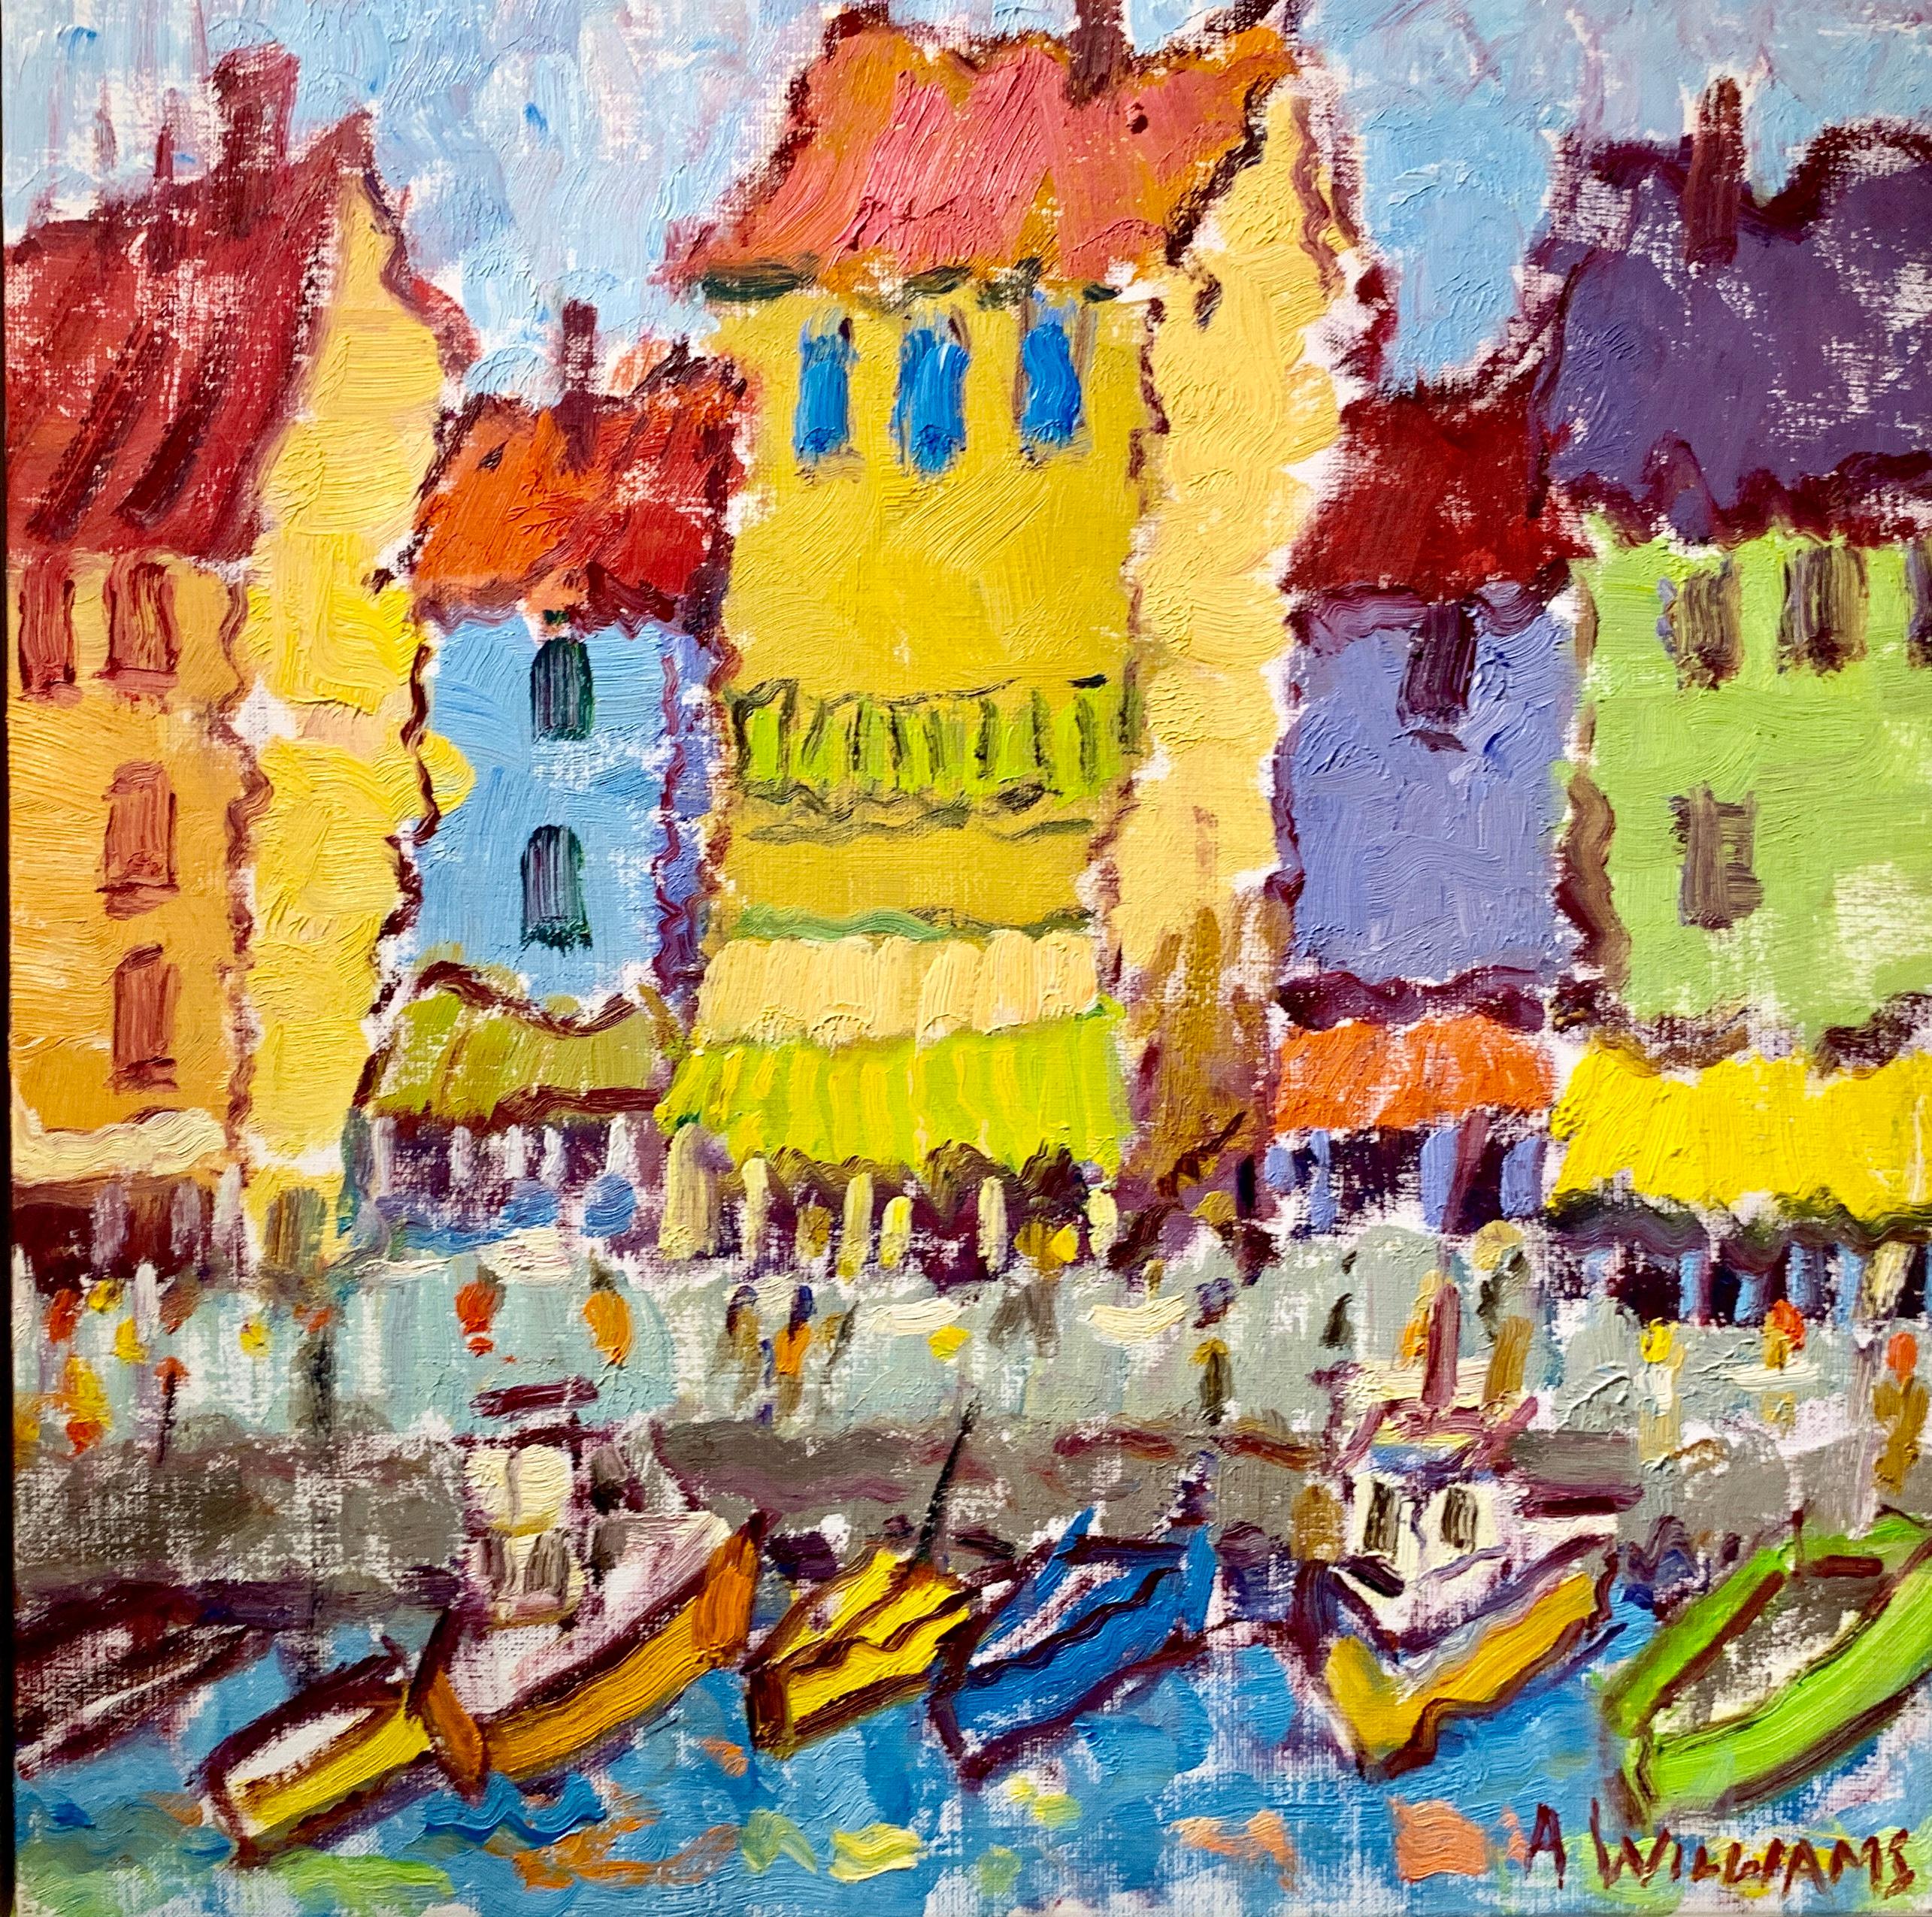 'The Charm of Cassis' is a framed oil on canvas Post-Impressionist painting created by American artist Alice Williams in 2019. Featuring a vibrant palette made of yellow, red, blue, purple, orange and green tones among others, the painting depict